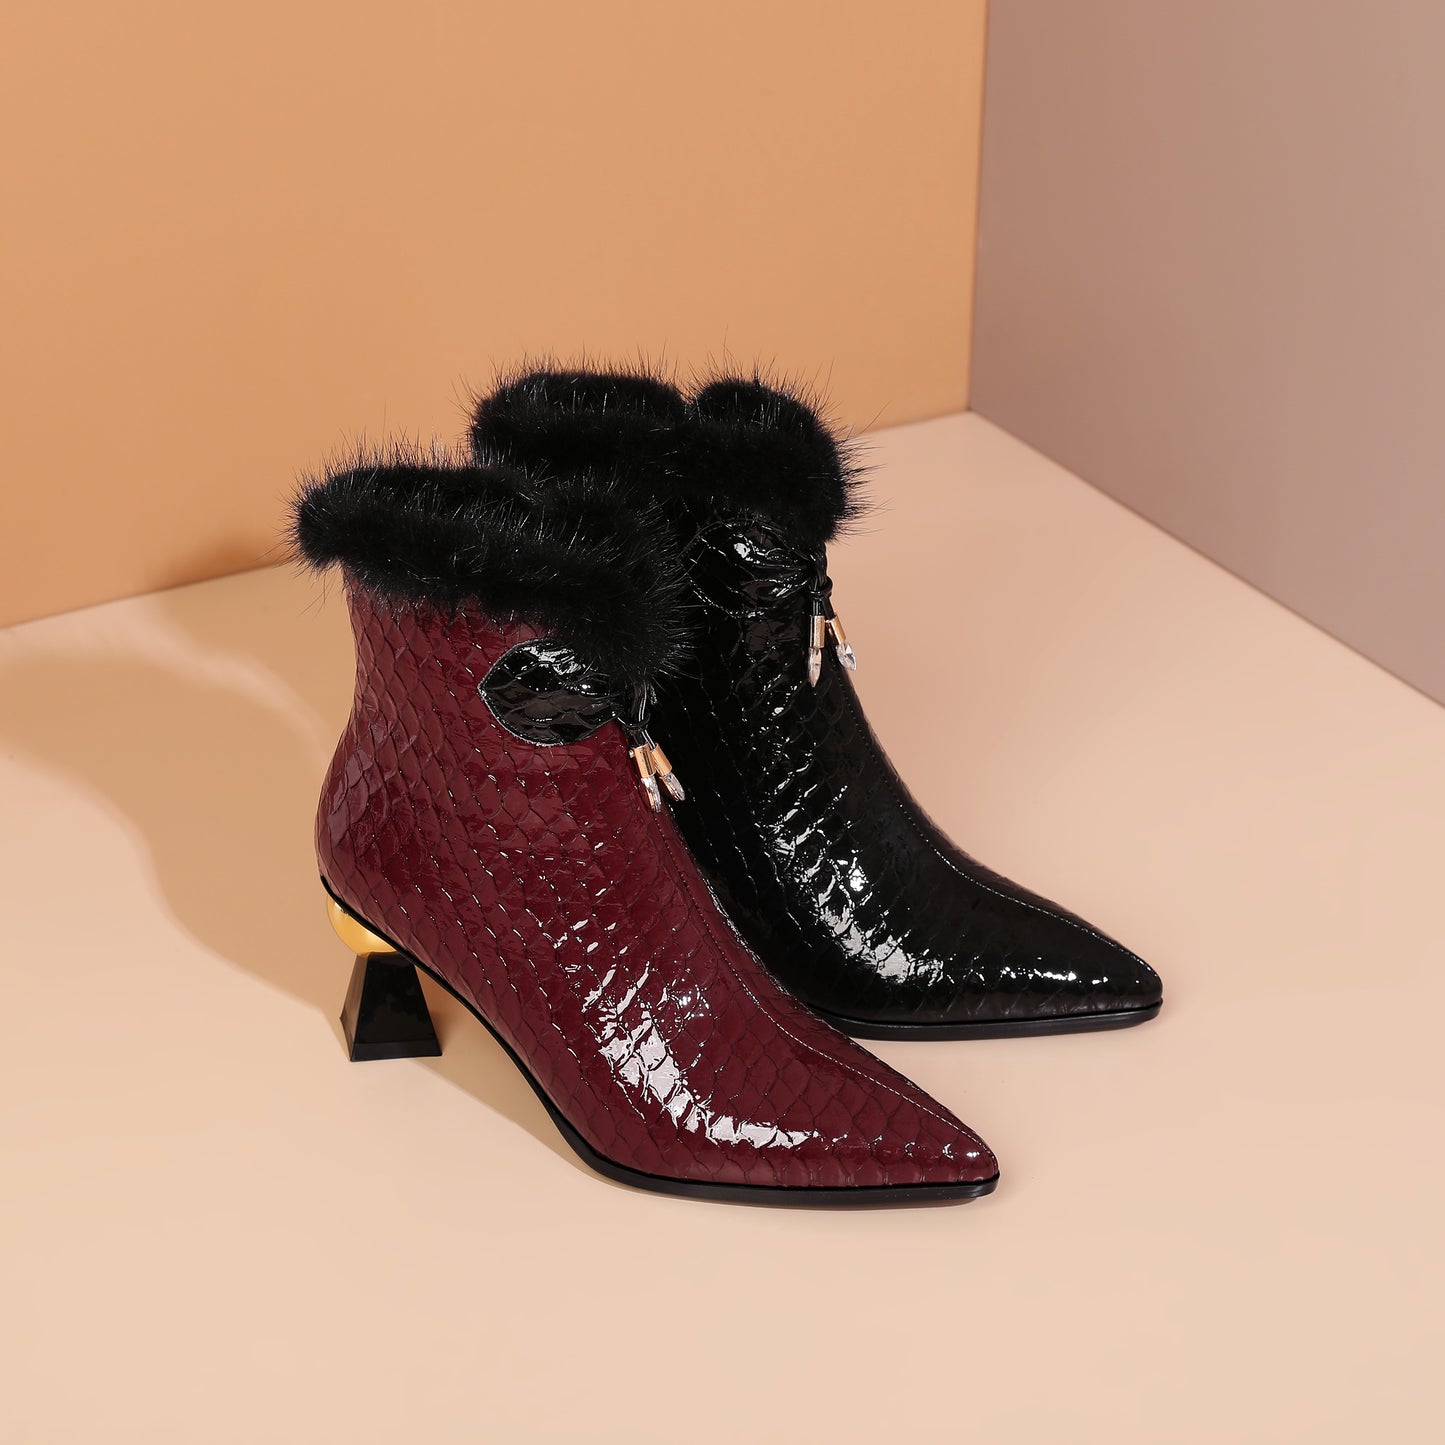 TinaCus Patent Leather Handmade Women's Pointy Toe Side Zip Up Mid Heel Crystal and Fur Design Ankle Boots with Bow